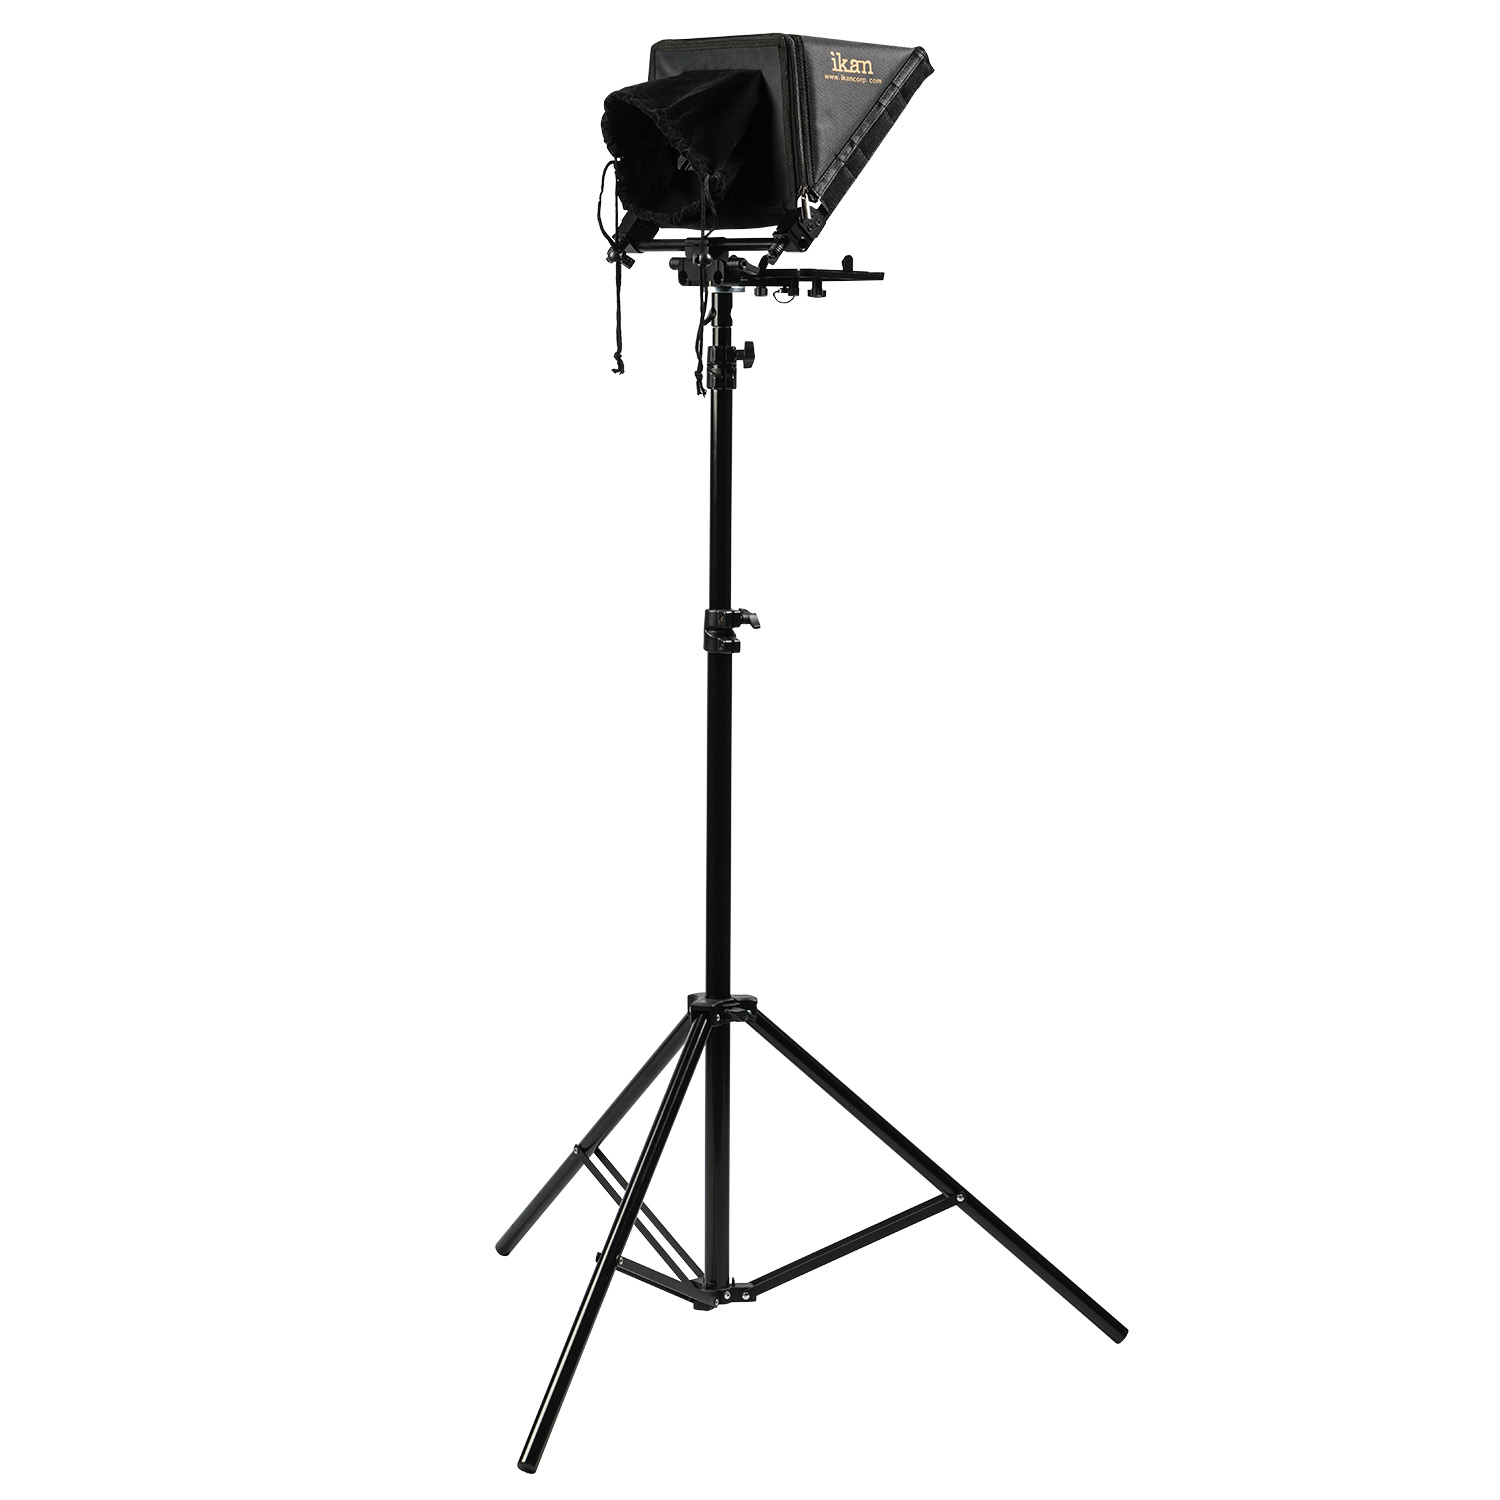 ikan Elite Tablet & iPad Light Stand Teleprompter with Elite Remote